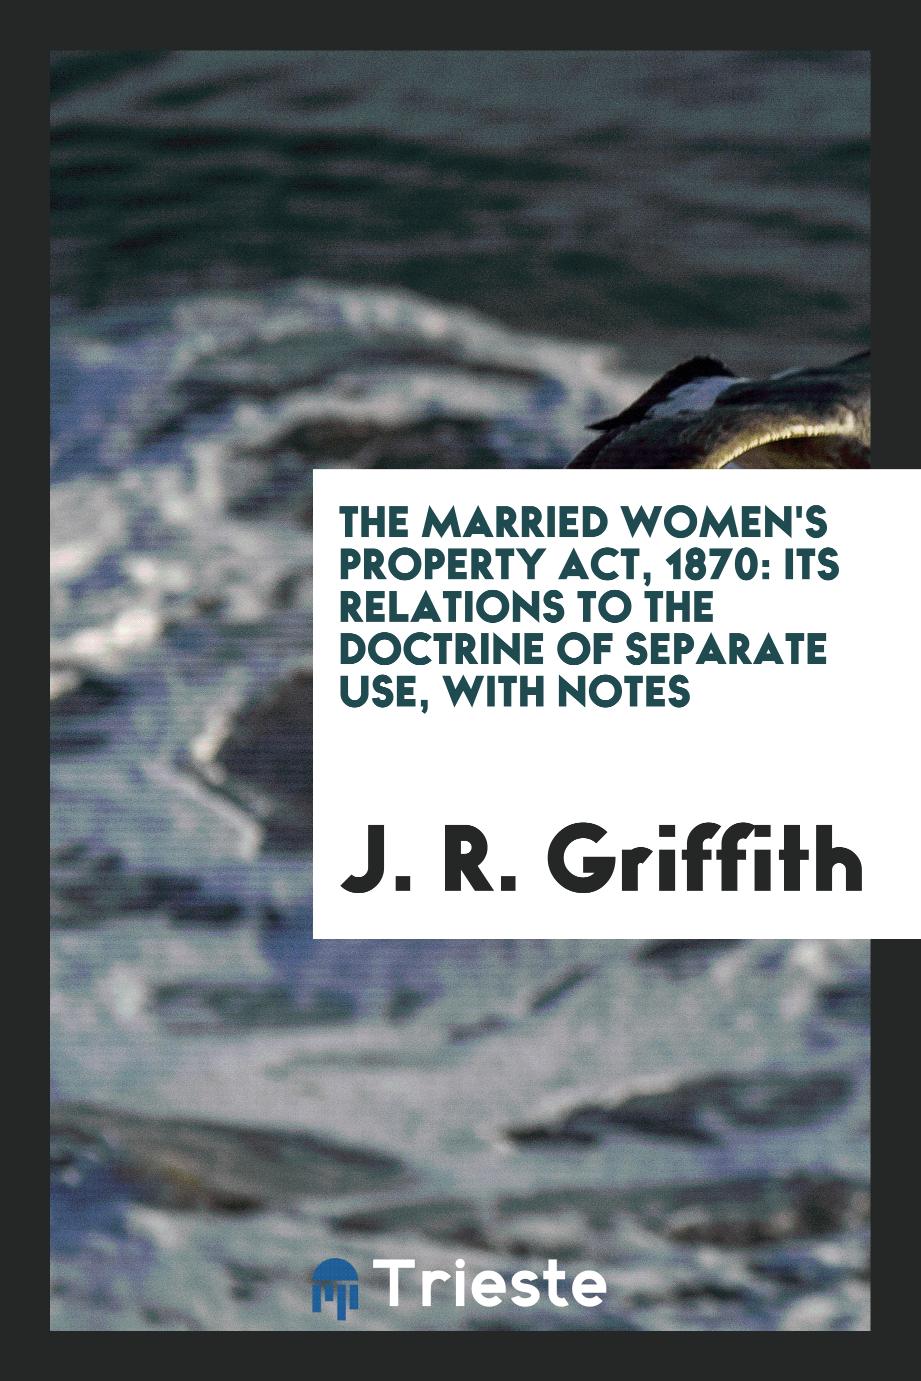 The Married Women's Property Act, 1870: Its Relations to the Doctrine of Separate Use, with Notes